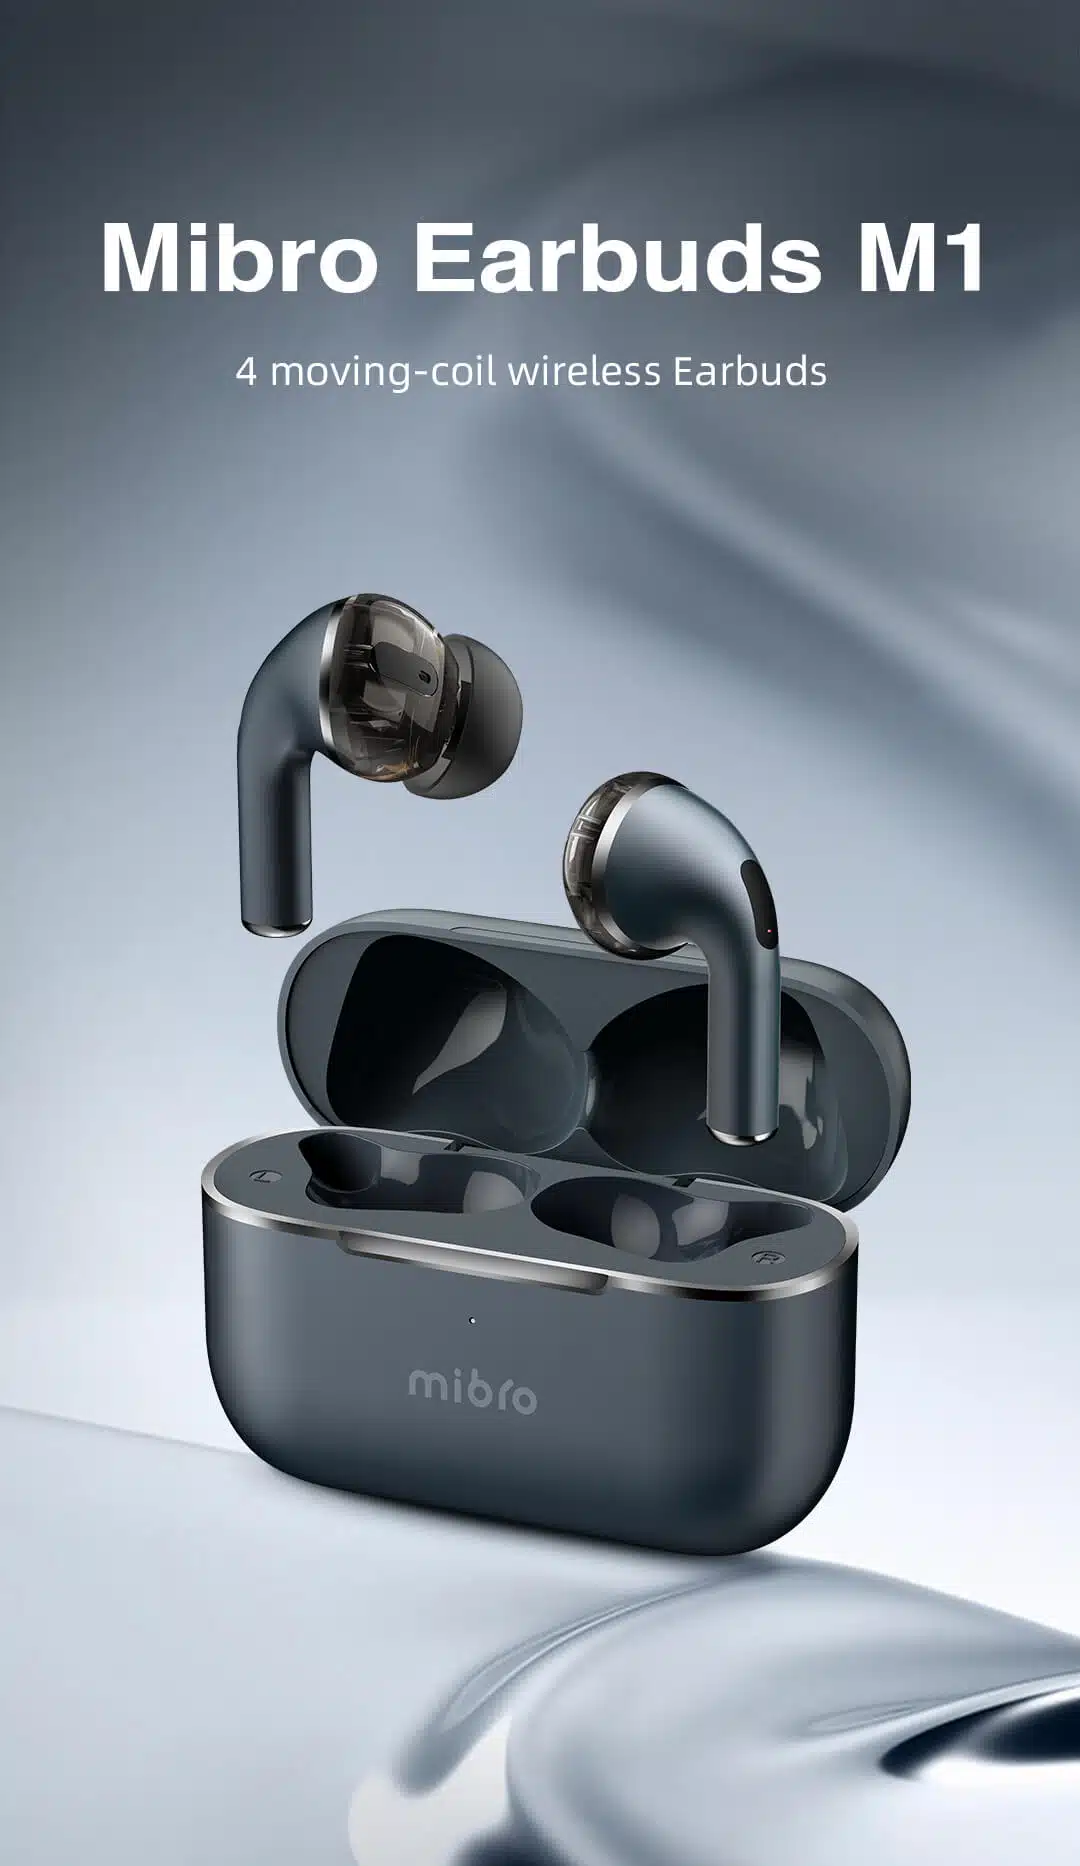 mibro-m1-earbuds-feature-1